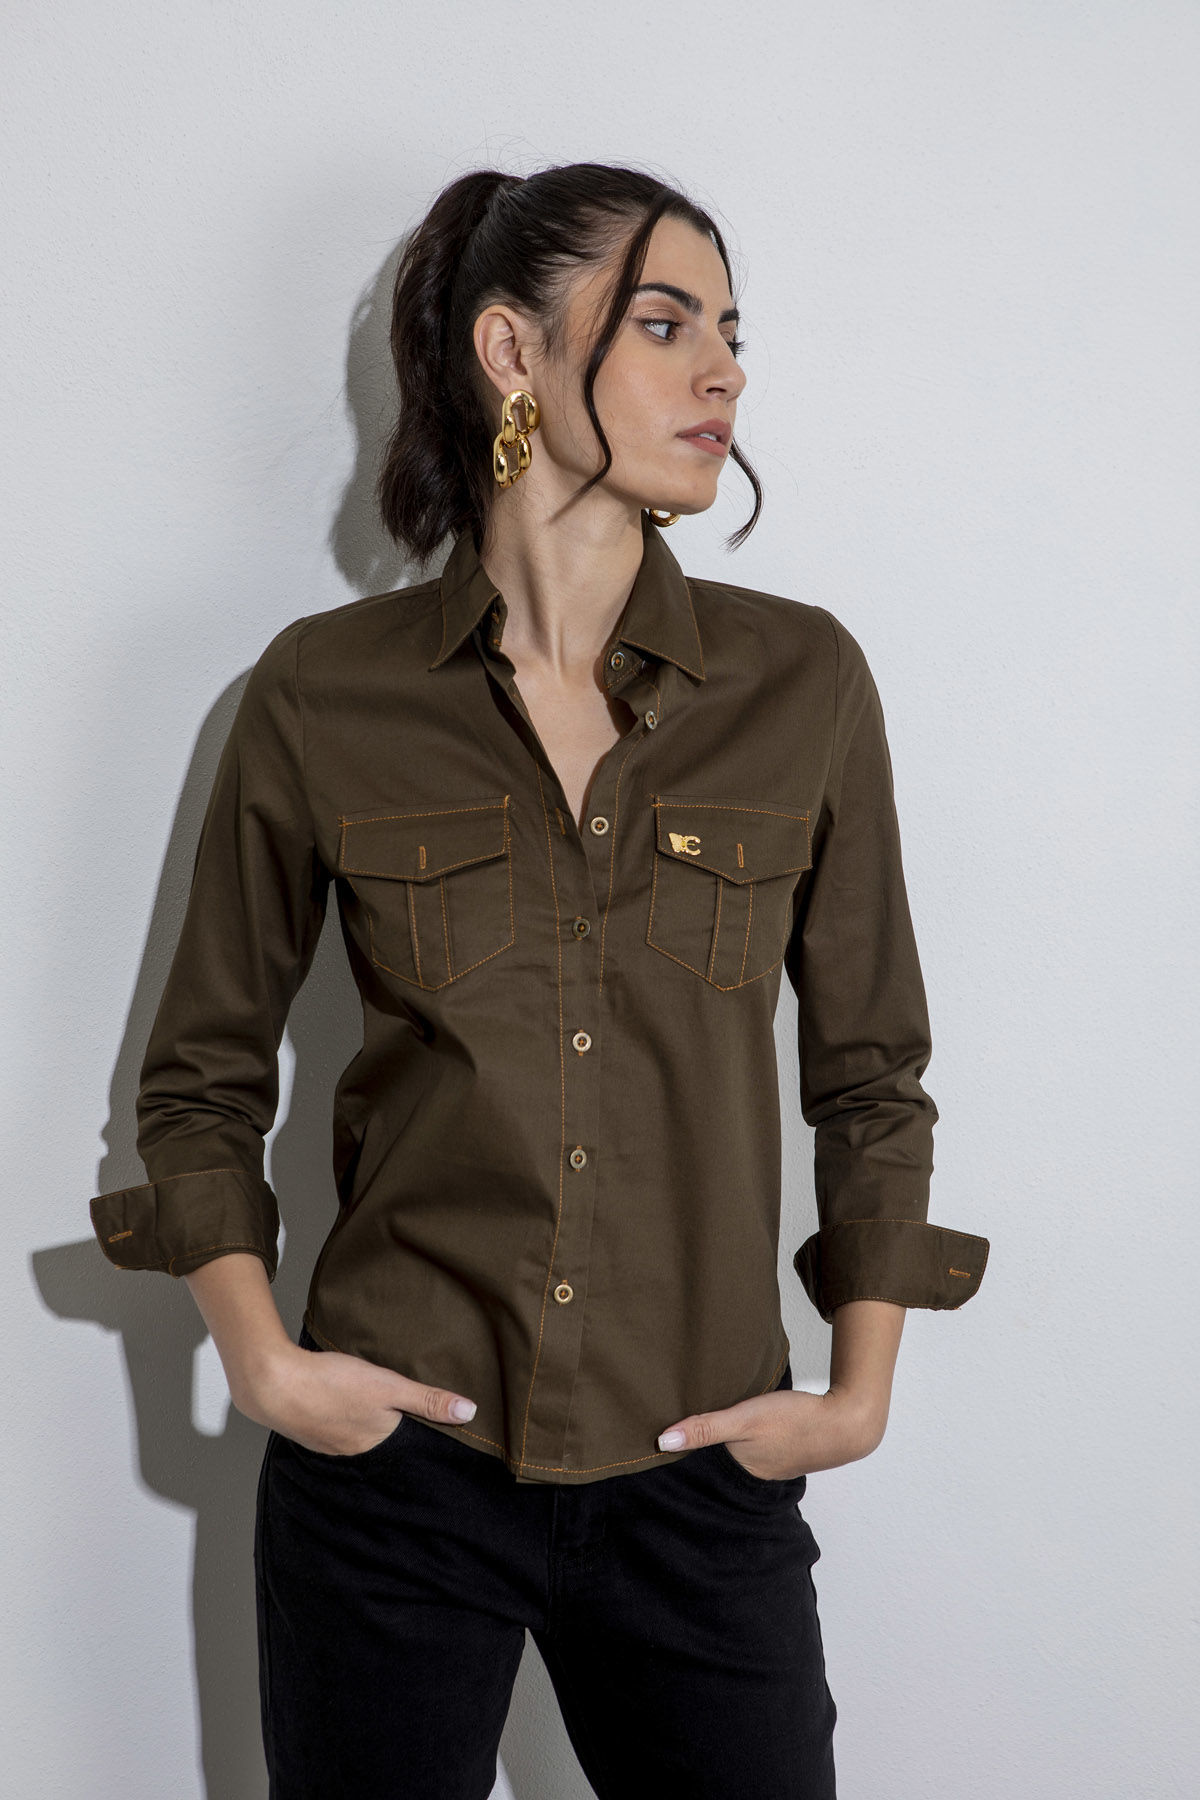 Picture of Military style shirt